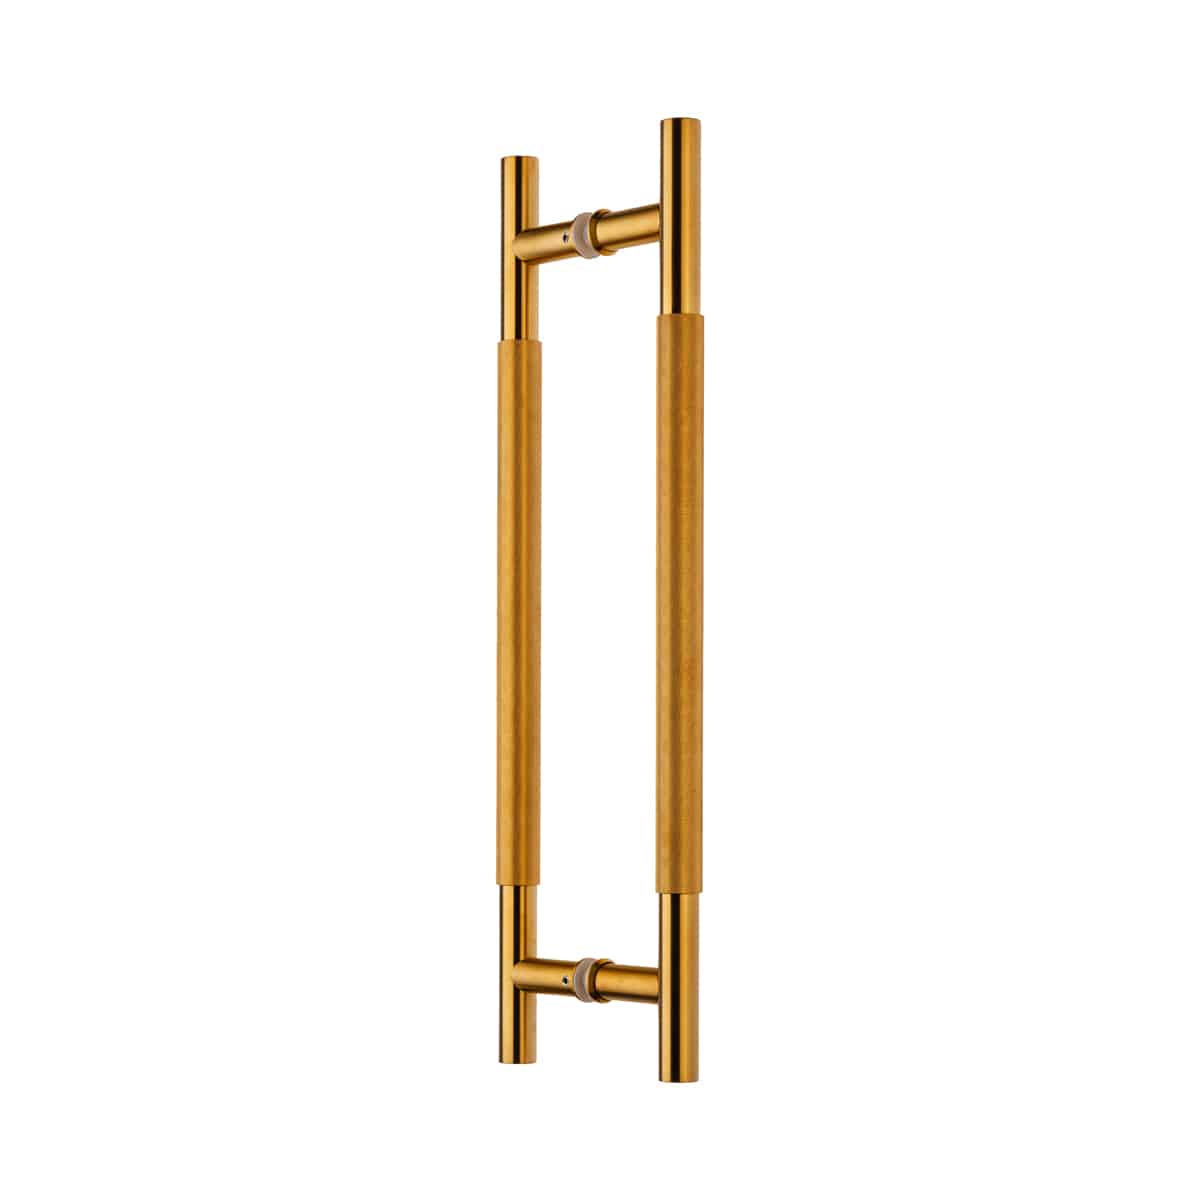 knurled-pull-handle-500x400x25mm-s-brass